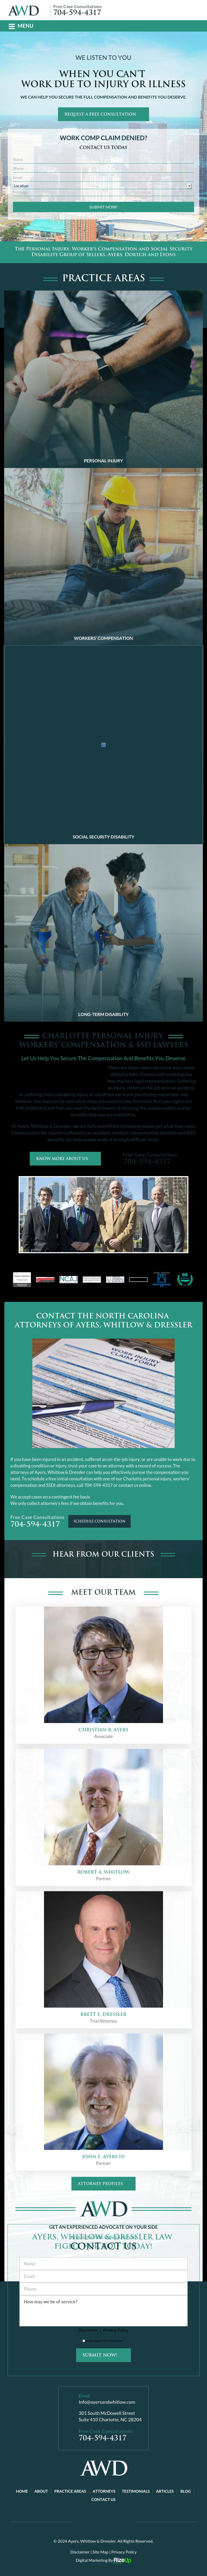 Ayers, Whitlow & Dressler - Charlotte NC Lawyers